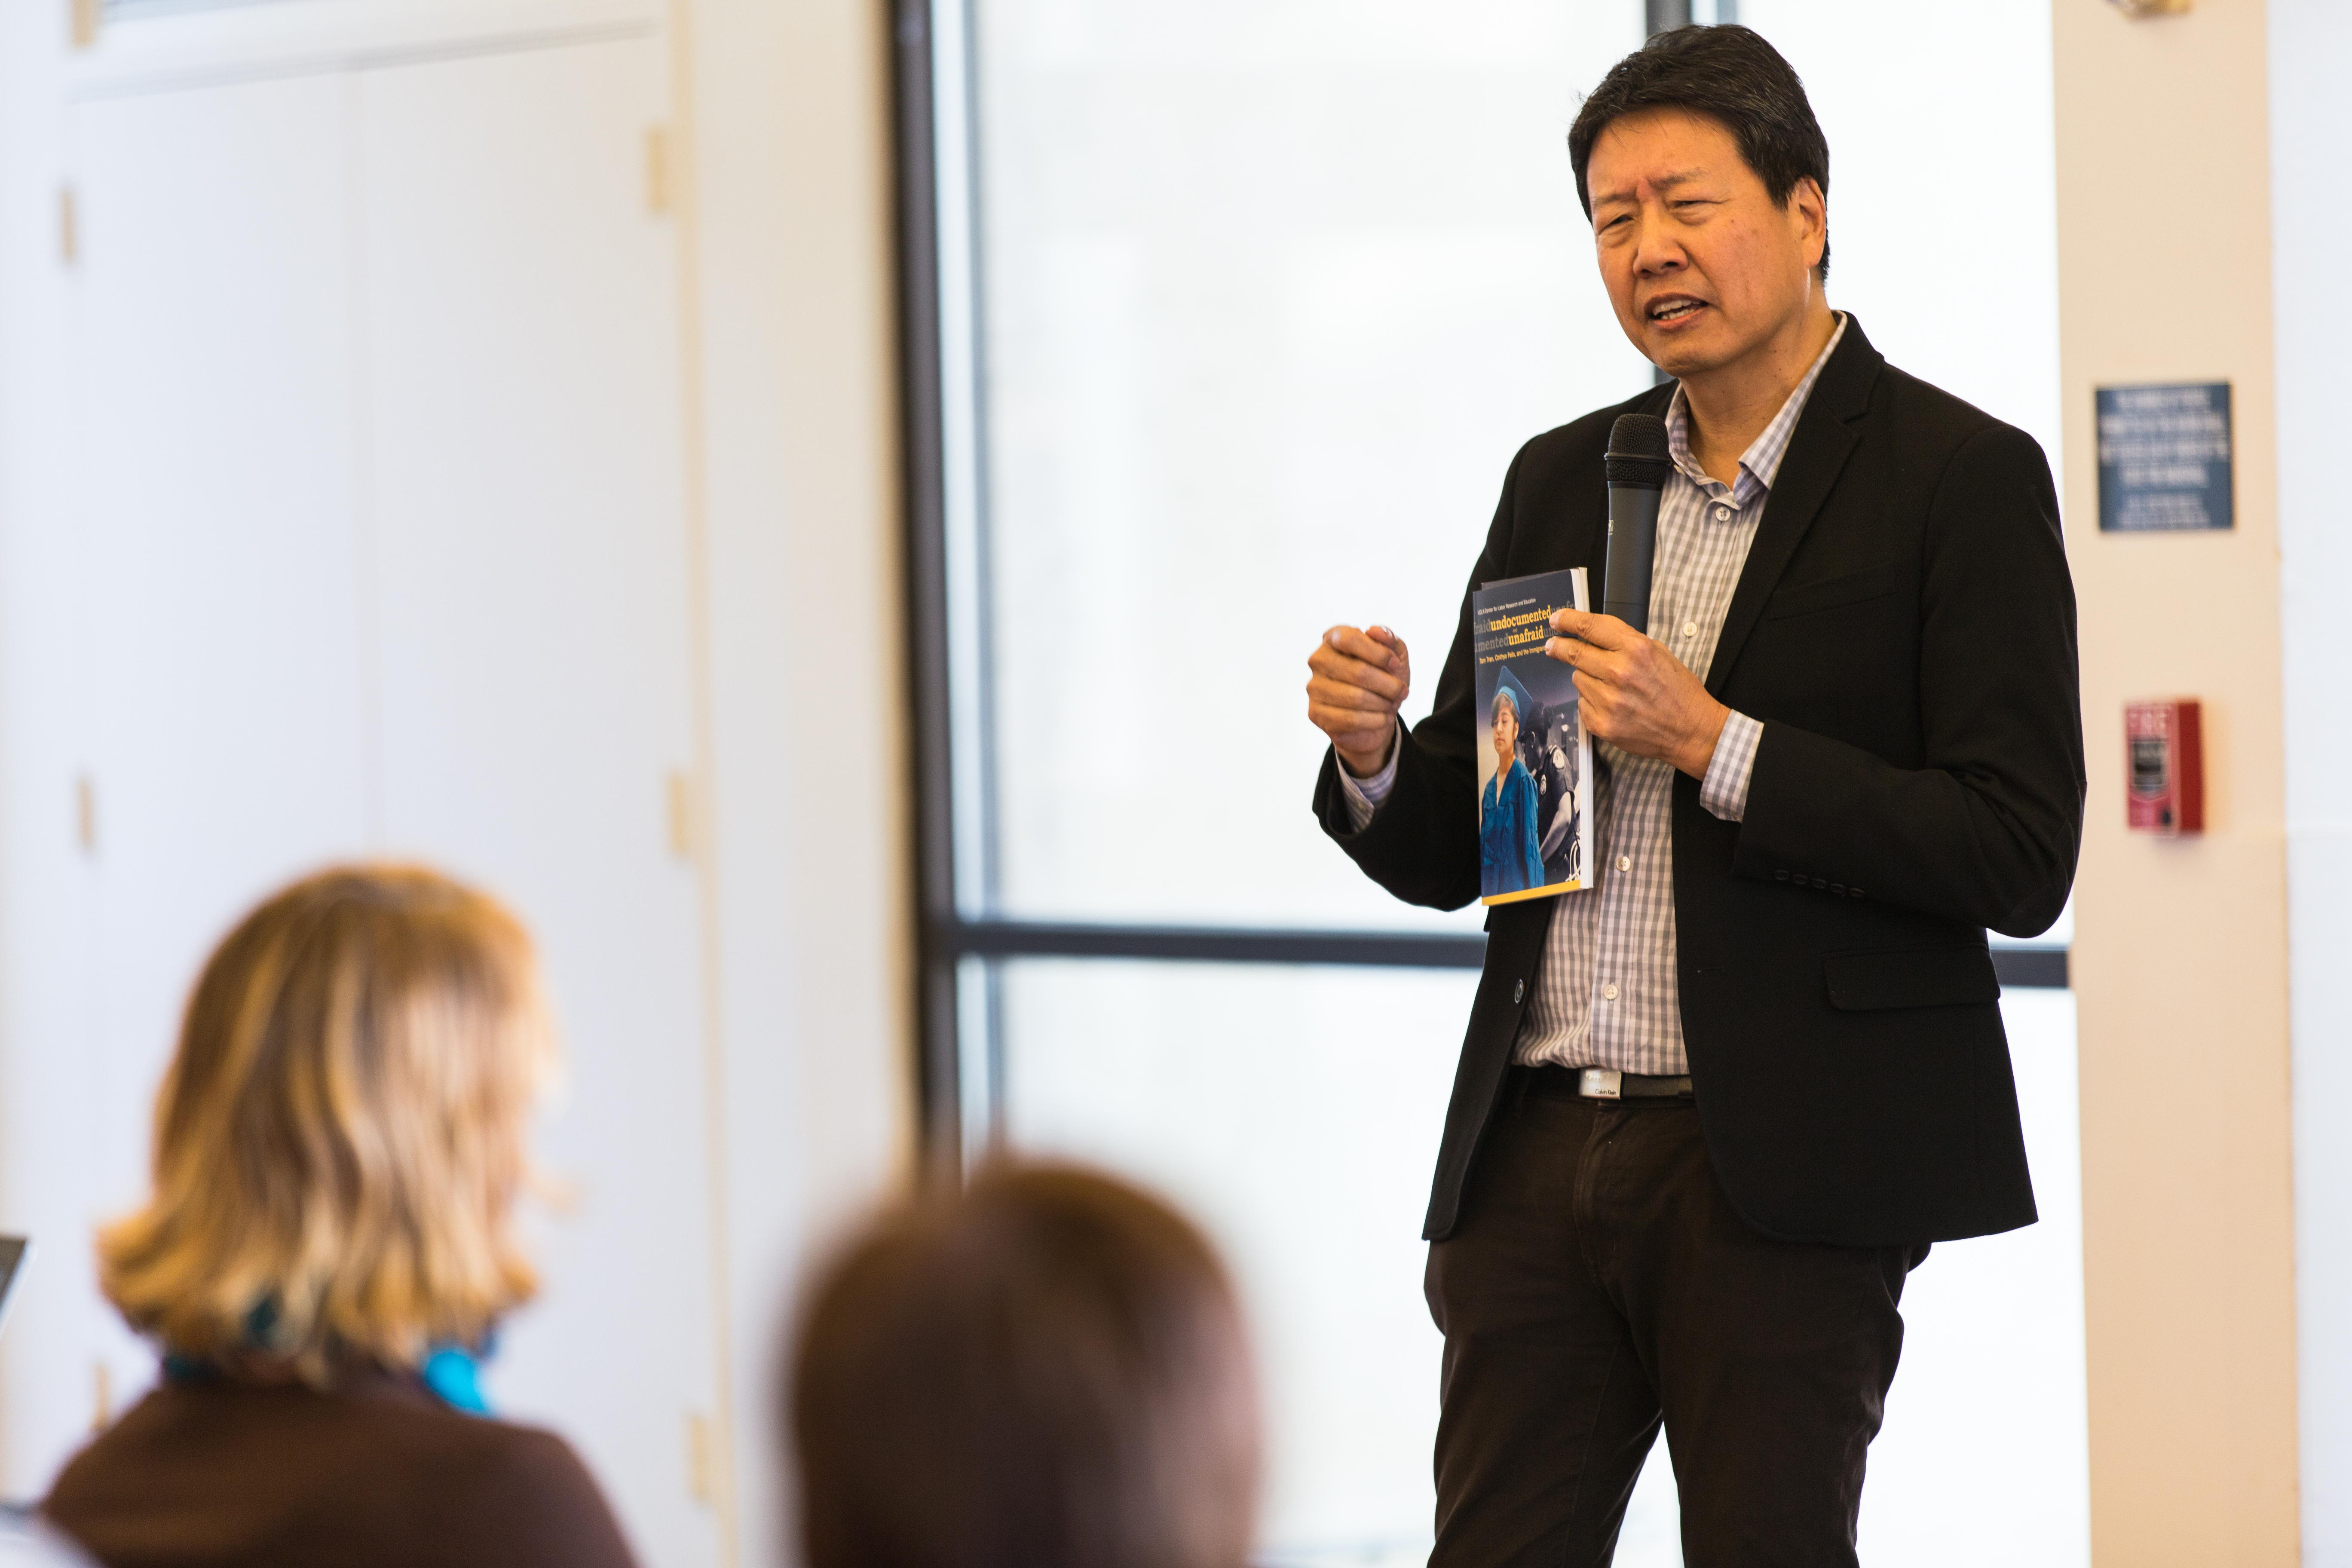 Professor Kent Wong, director of UCLA Labor Center, at the City Cafe in City College on Feb. 28 speaks to students about the publication “Immigrant Youth in the Silicon Valley” and highlights the struggles of undocumented youths in the U.S. Photo by John Ortilla/The Guardsman. 